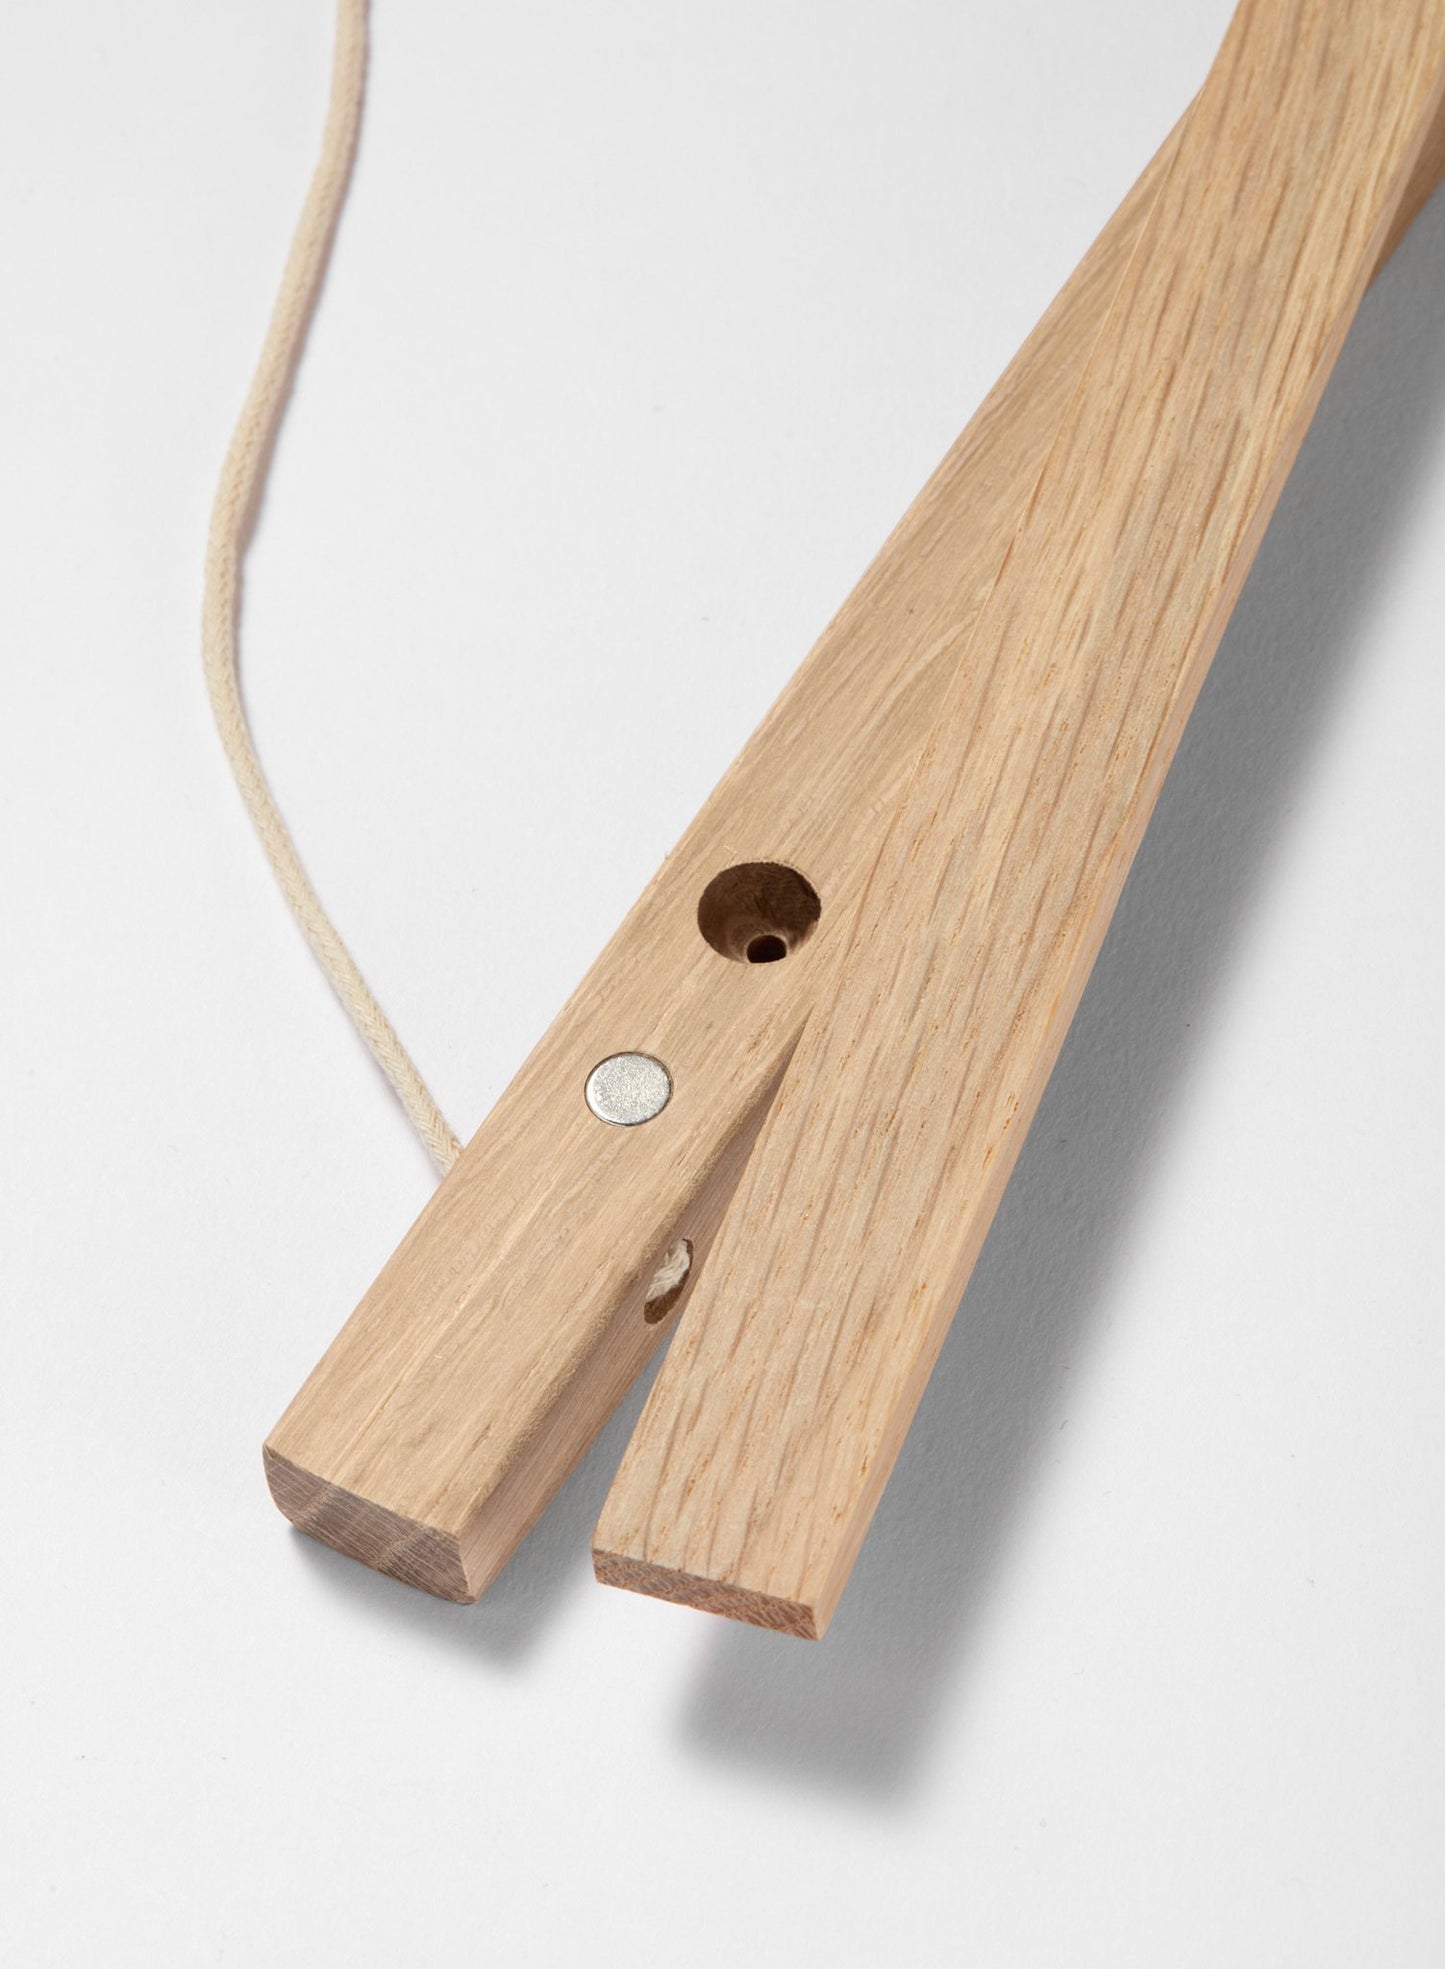 Scandinavian solid oak poster wall hanger by Opposite Wall - Corner of the poster hanger - Size 20 inches